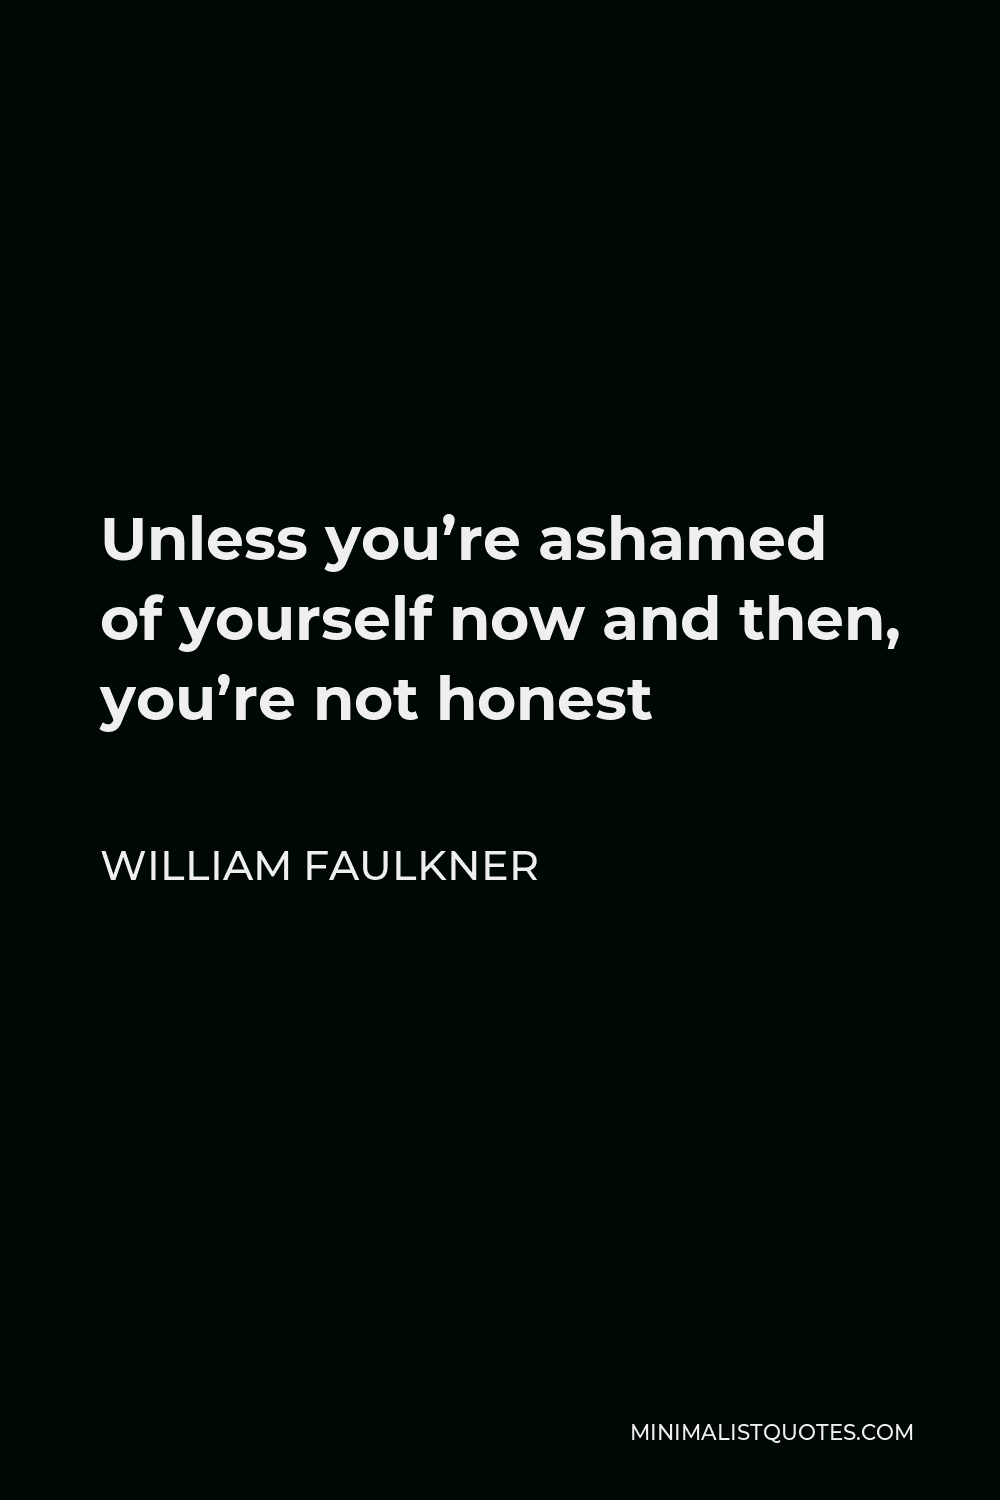 William Faulkner Quote - Unless you’re ashamed of yourself now and then, you’re not honest